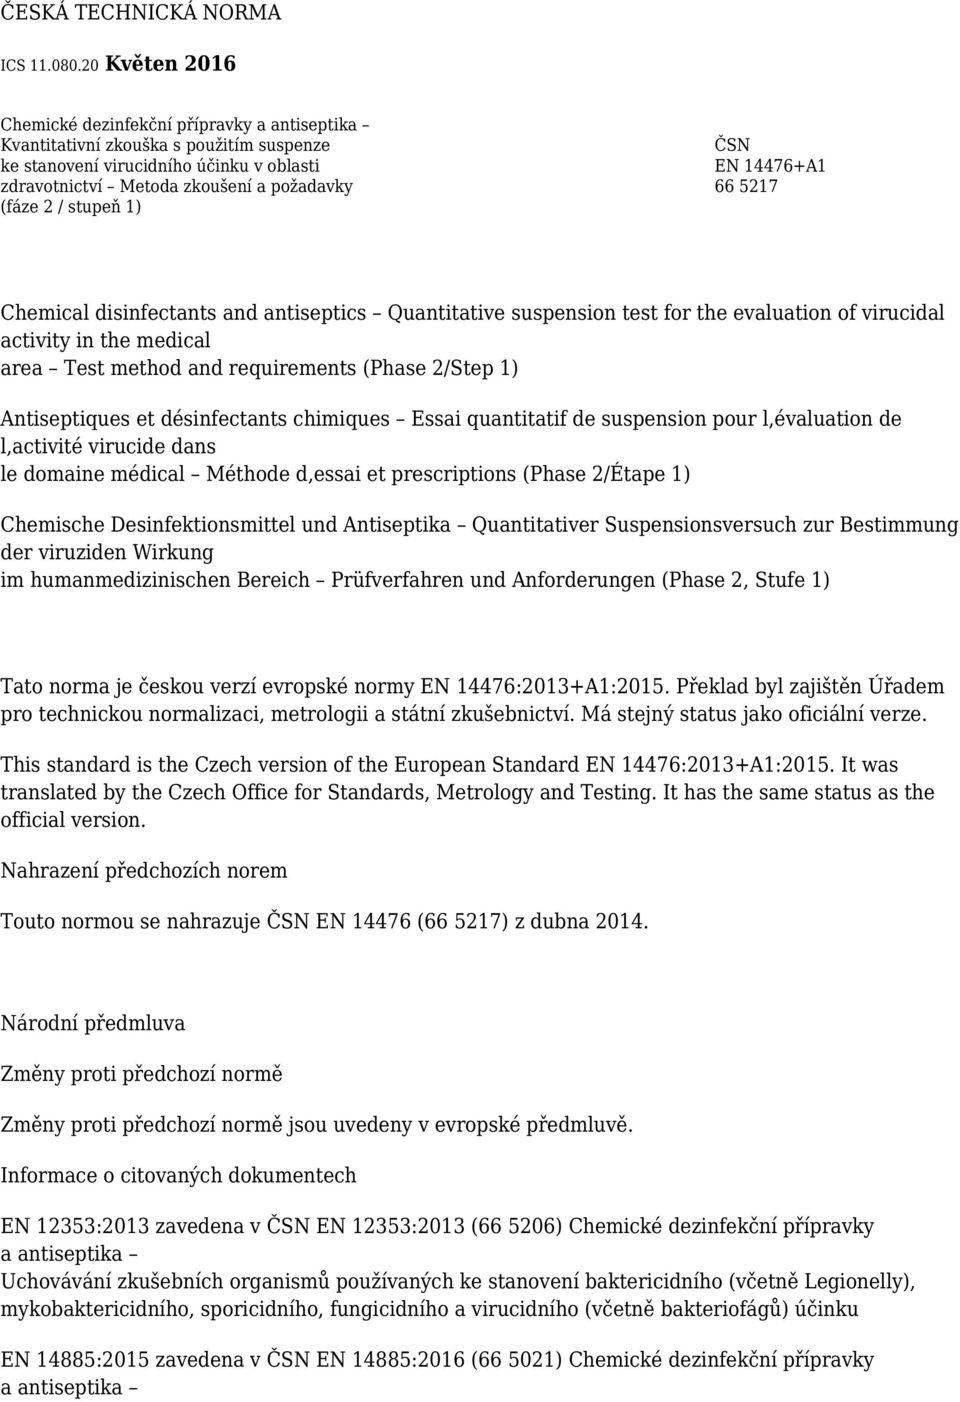 stupeň 1) ČSN EN 14476+A1 66 5217 Chemical disinfectants and antiseptics Quantitative suspension test for the evaluation of virucidal activity in the medical area Test method and requirements (Phase